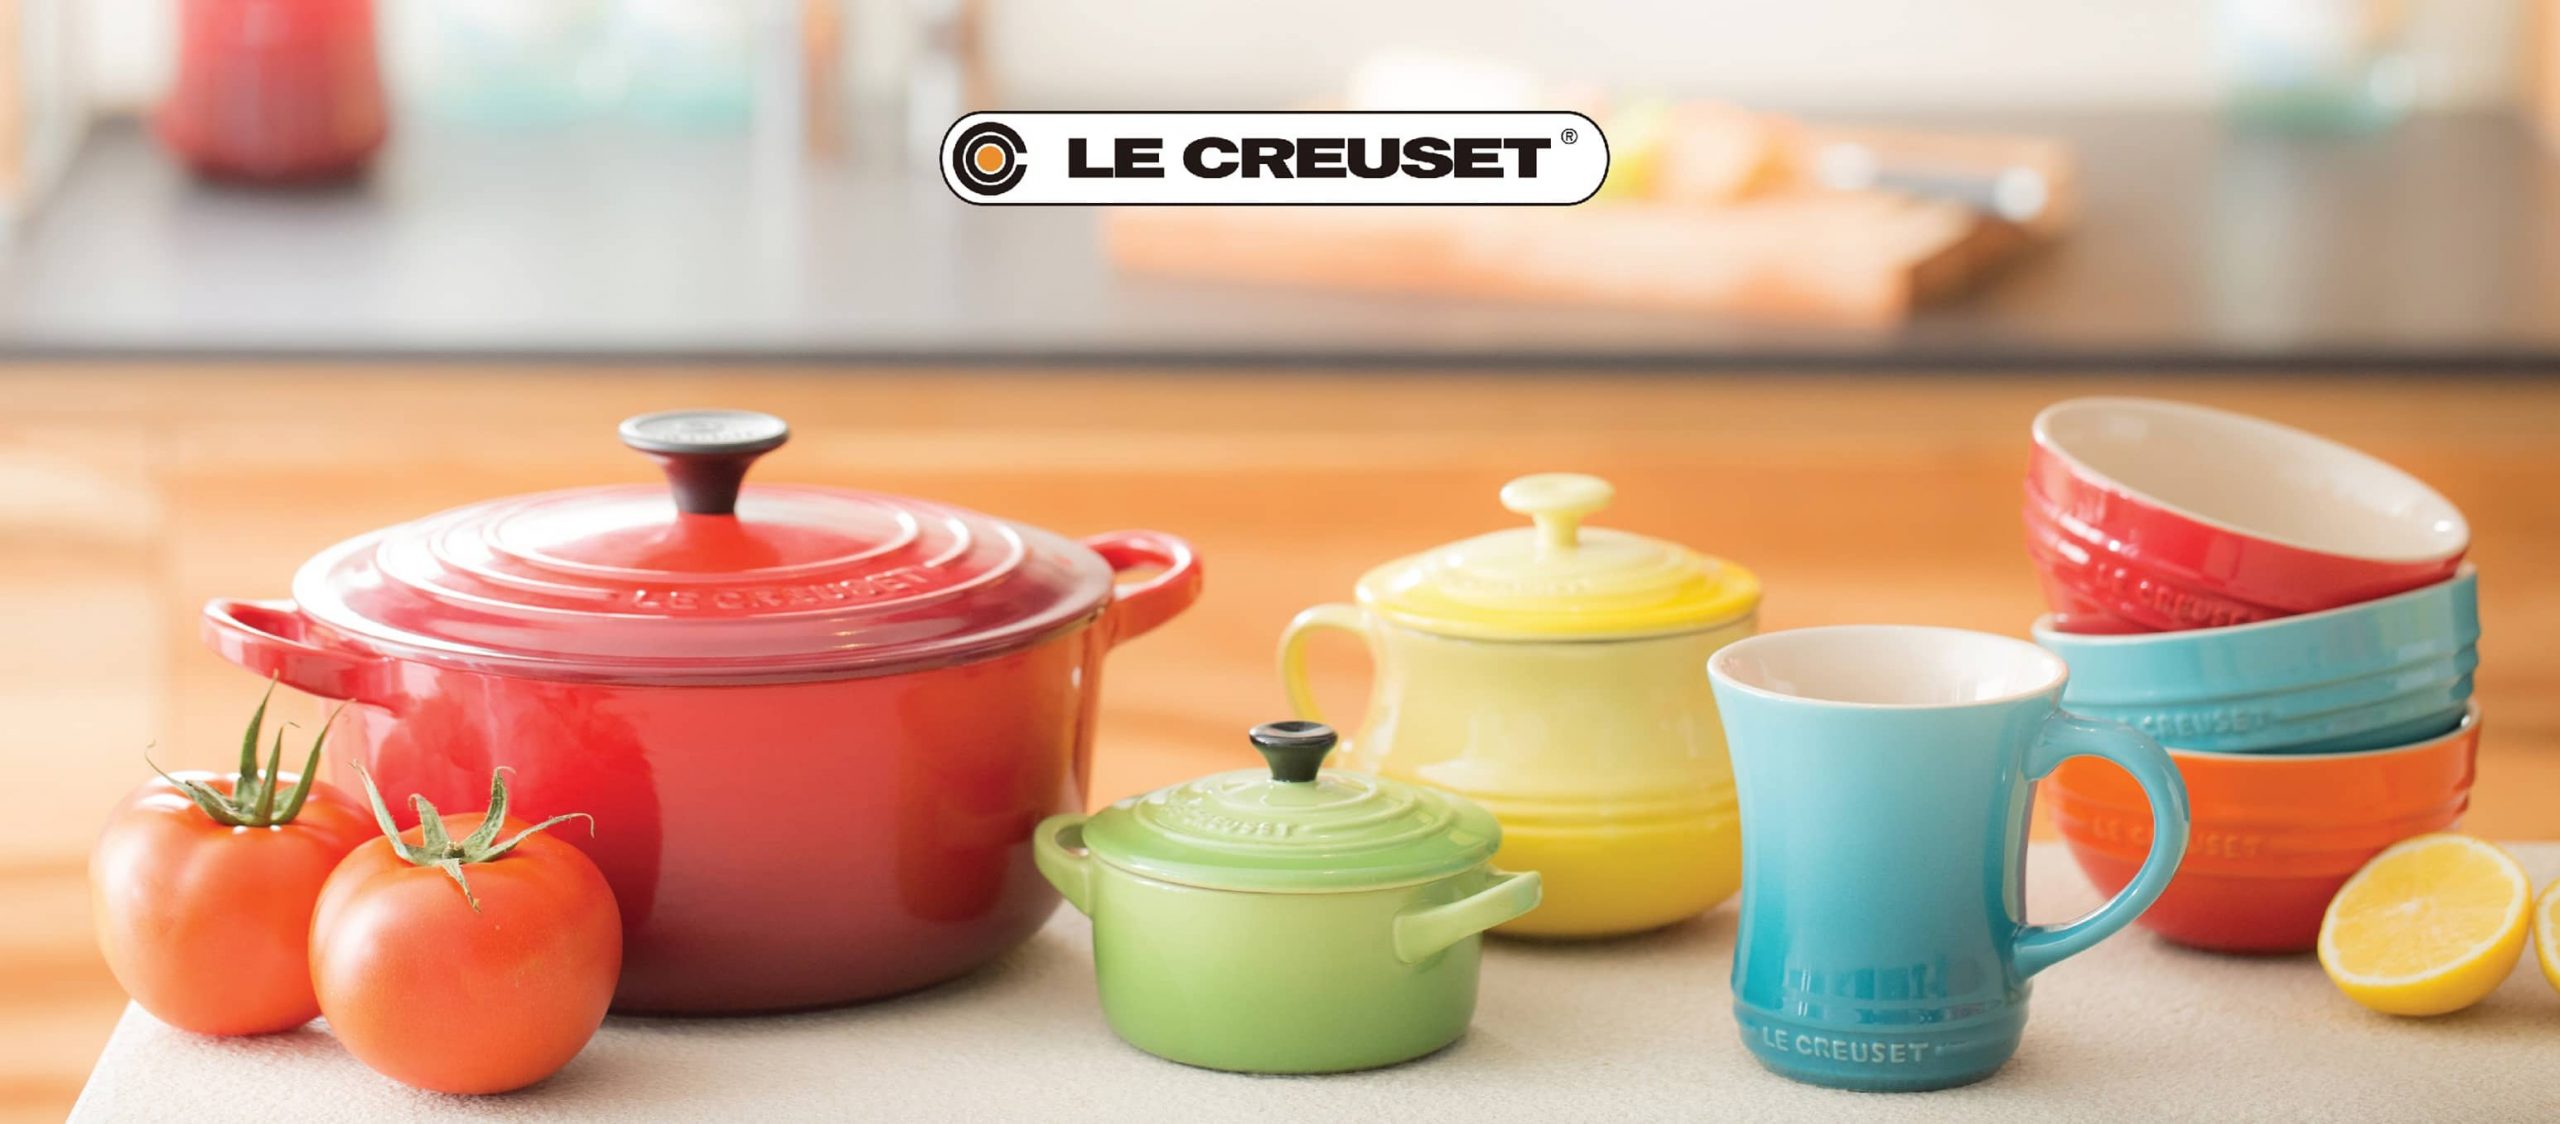 Does Le Creuset Ship to Israel?